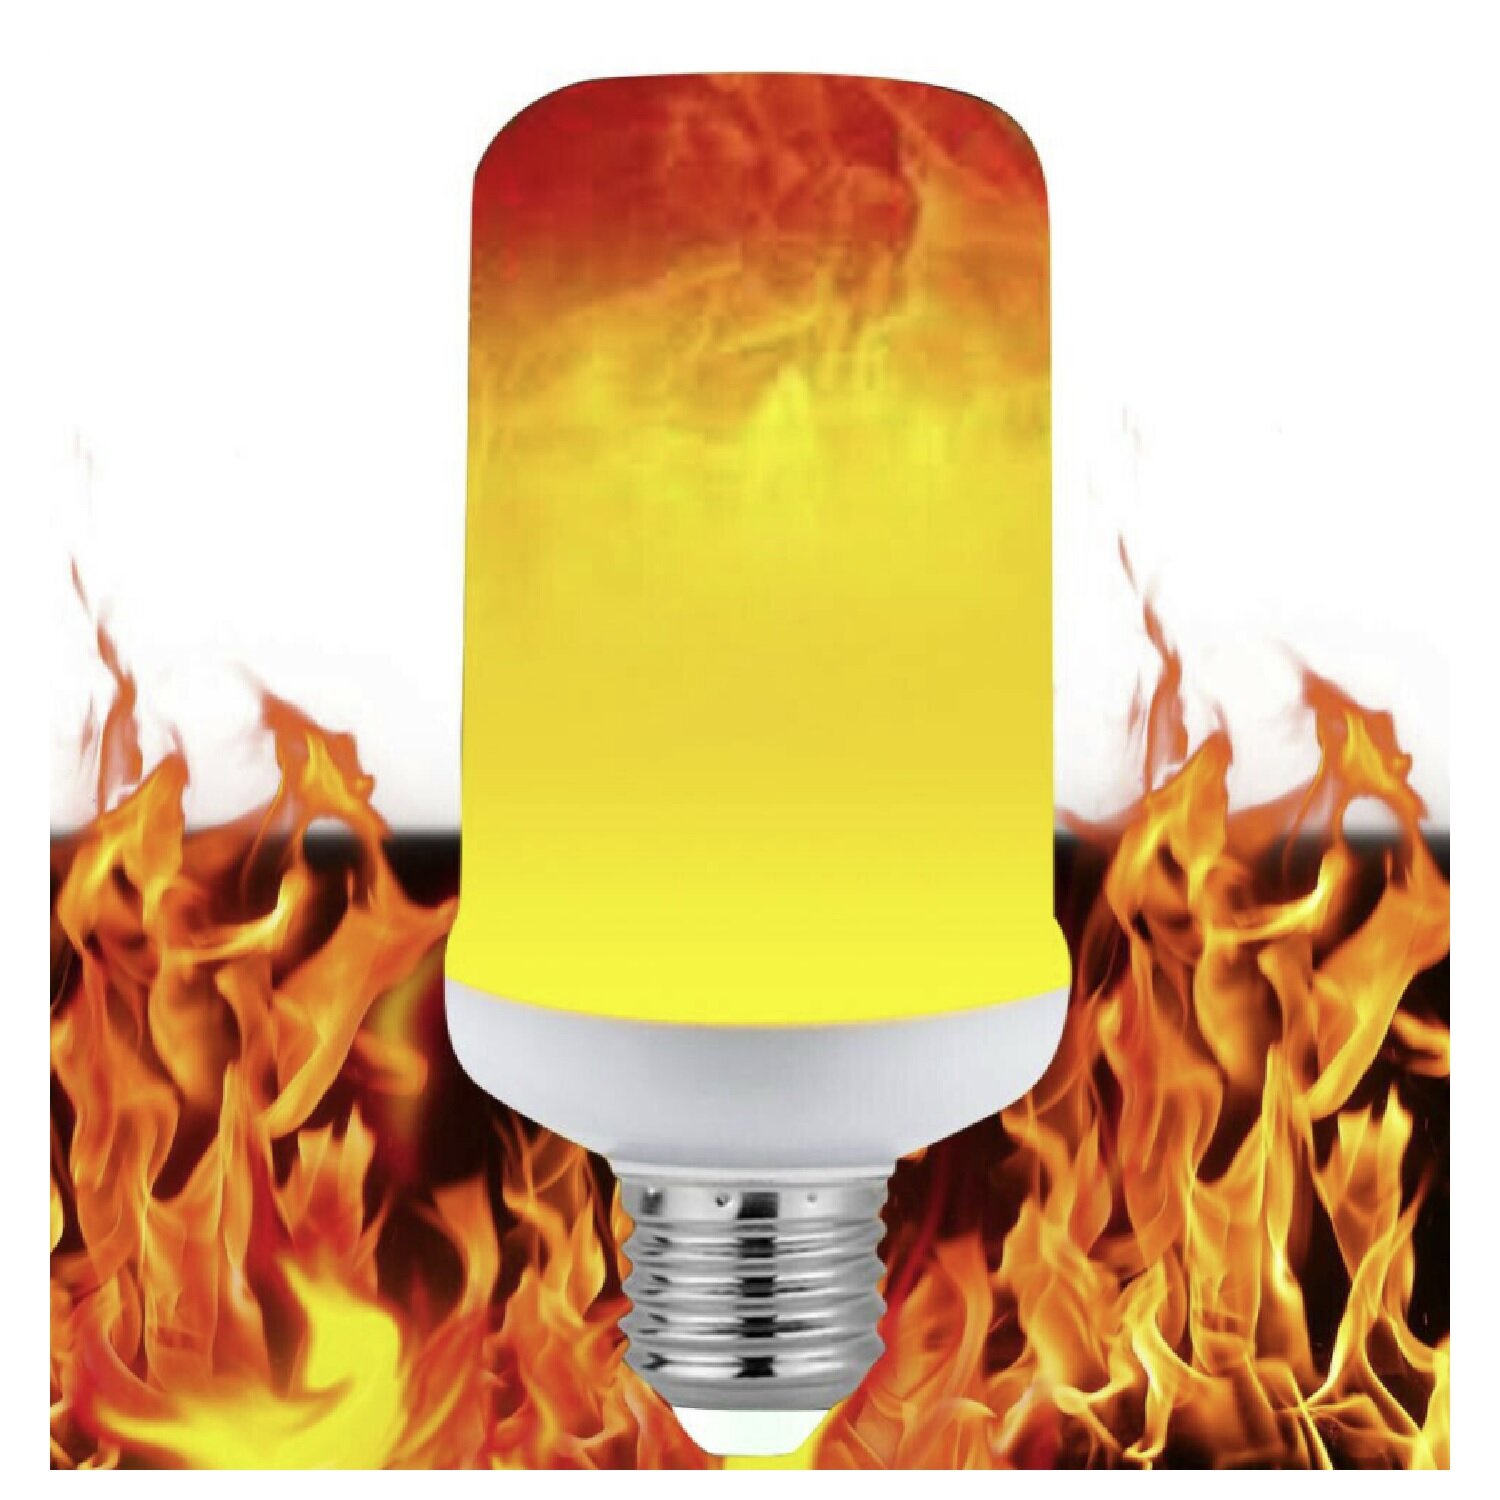 Details about   LED Flame Light Bulbs Simulated Burn Fire Effect Xmas Flicker Lamps E27 E26 Lot 